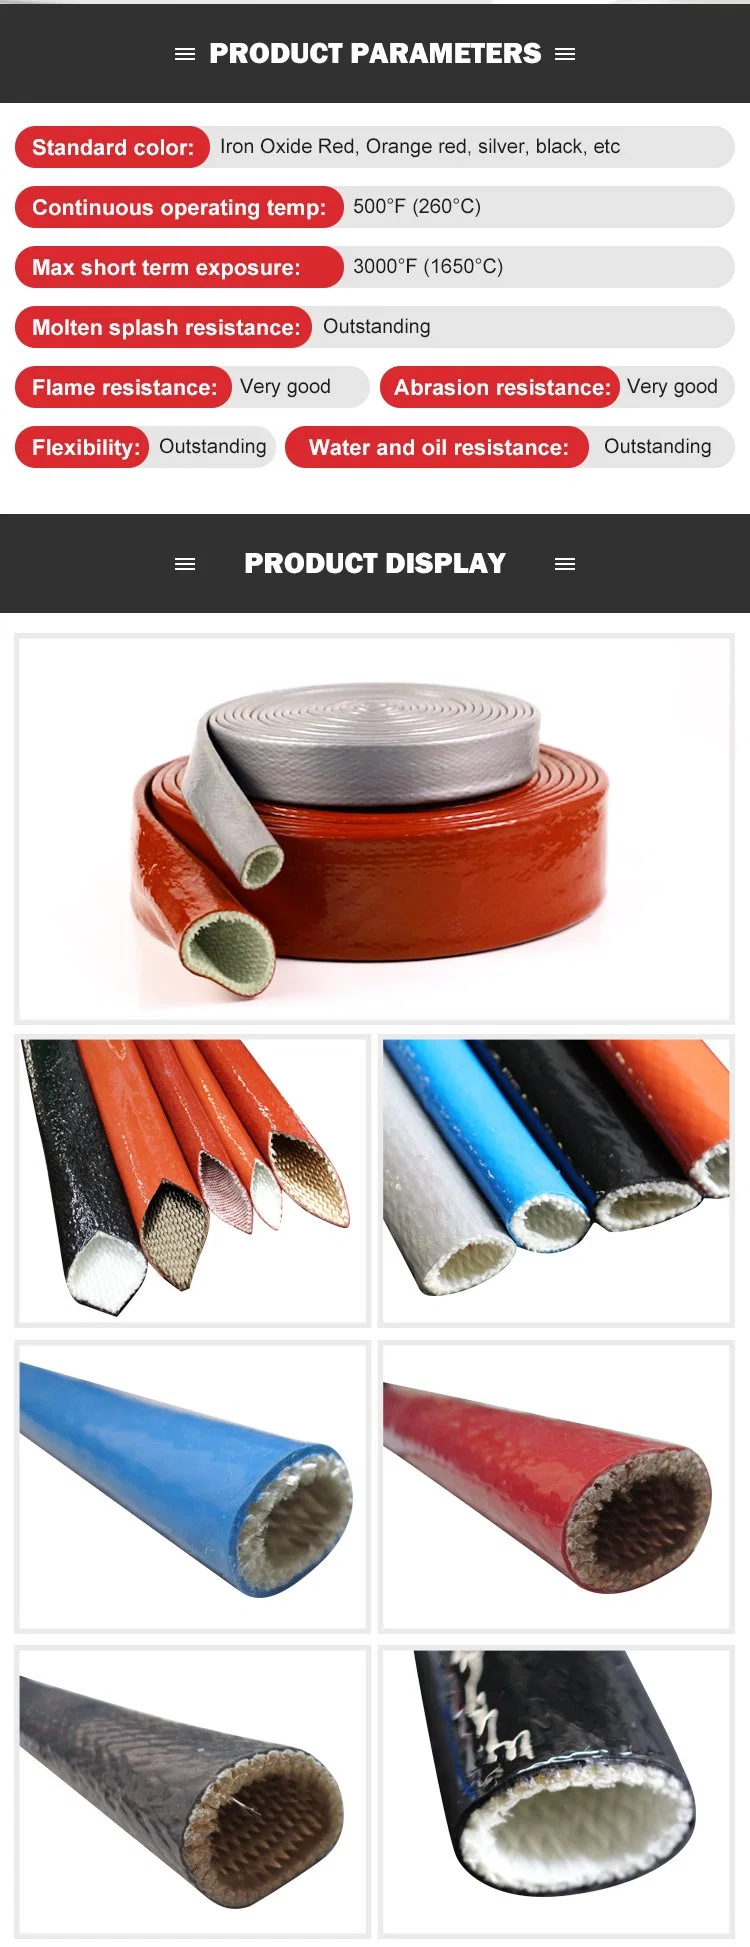 China Manufacturer Glass Fiber Braided Steel Fctory Cable Hose Protection Fire Sleeving Silicone Covered Braided Fiberglass Sleeving